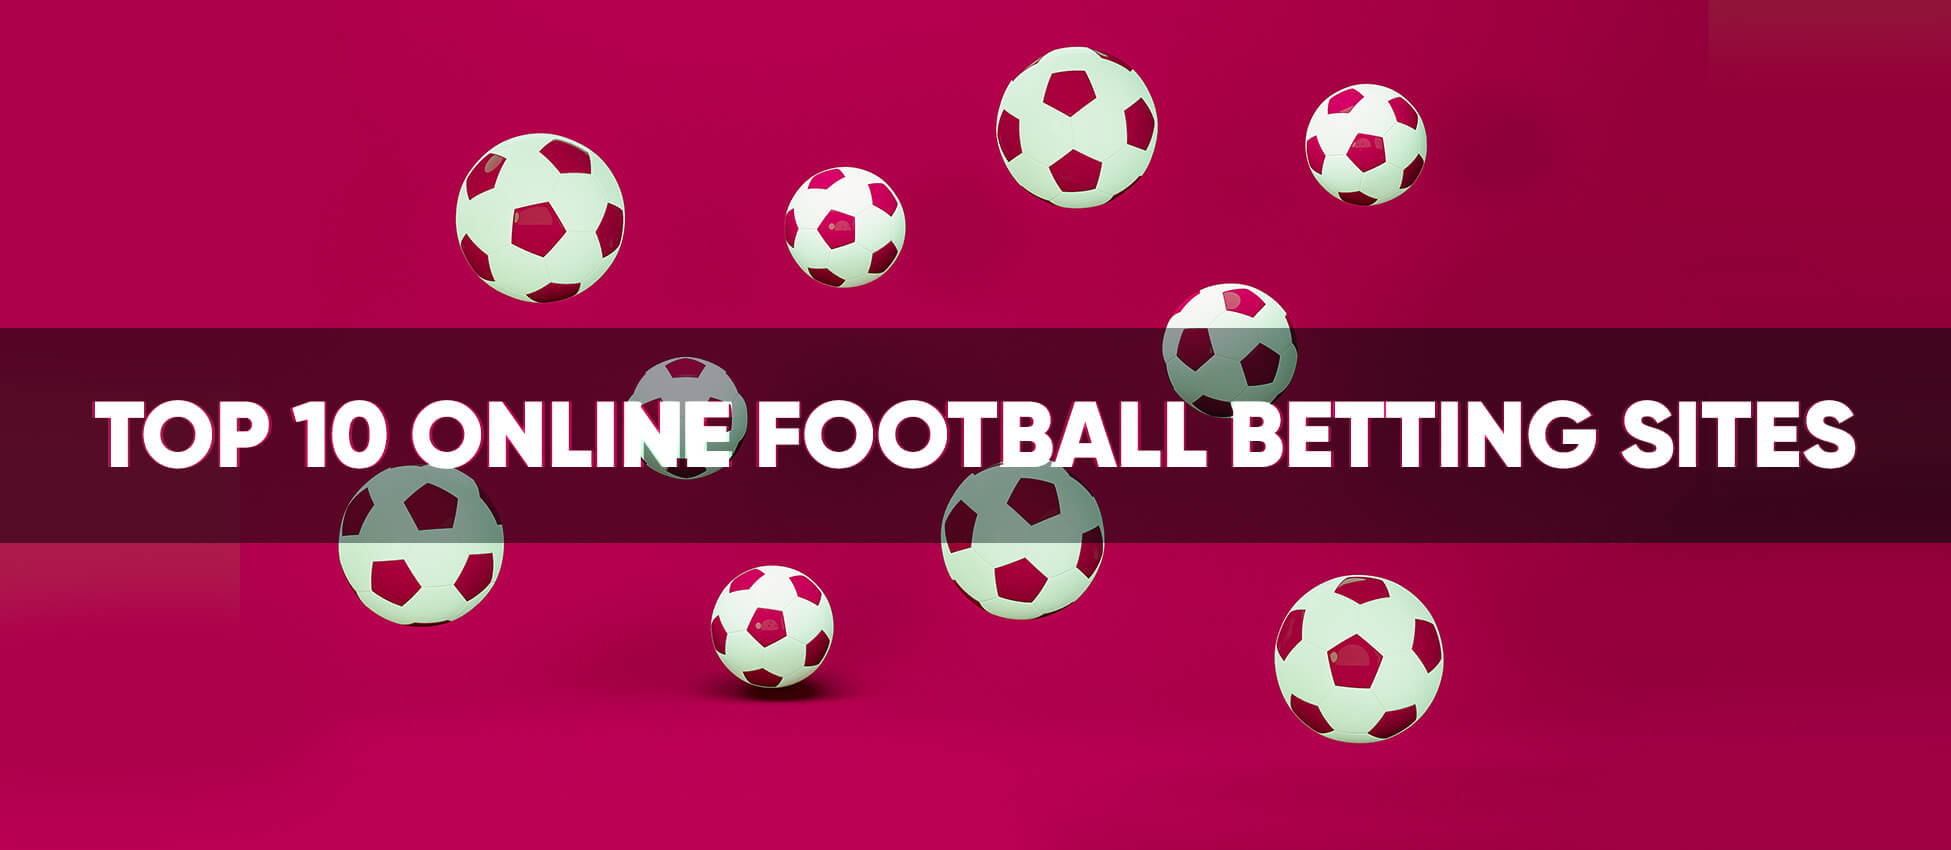 Top 10 Online Football Betting Sites in the UK